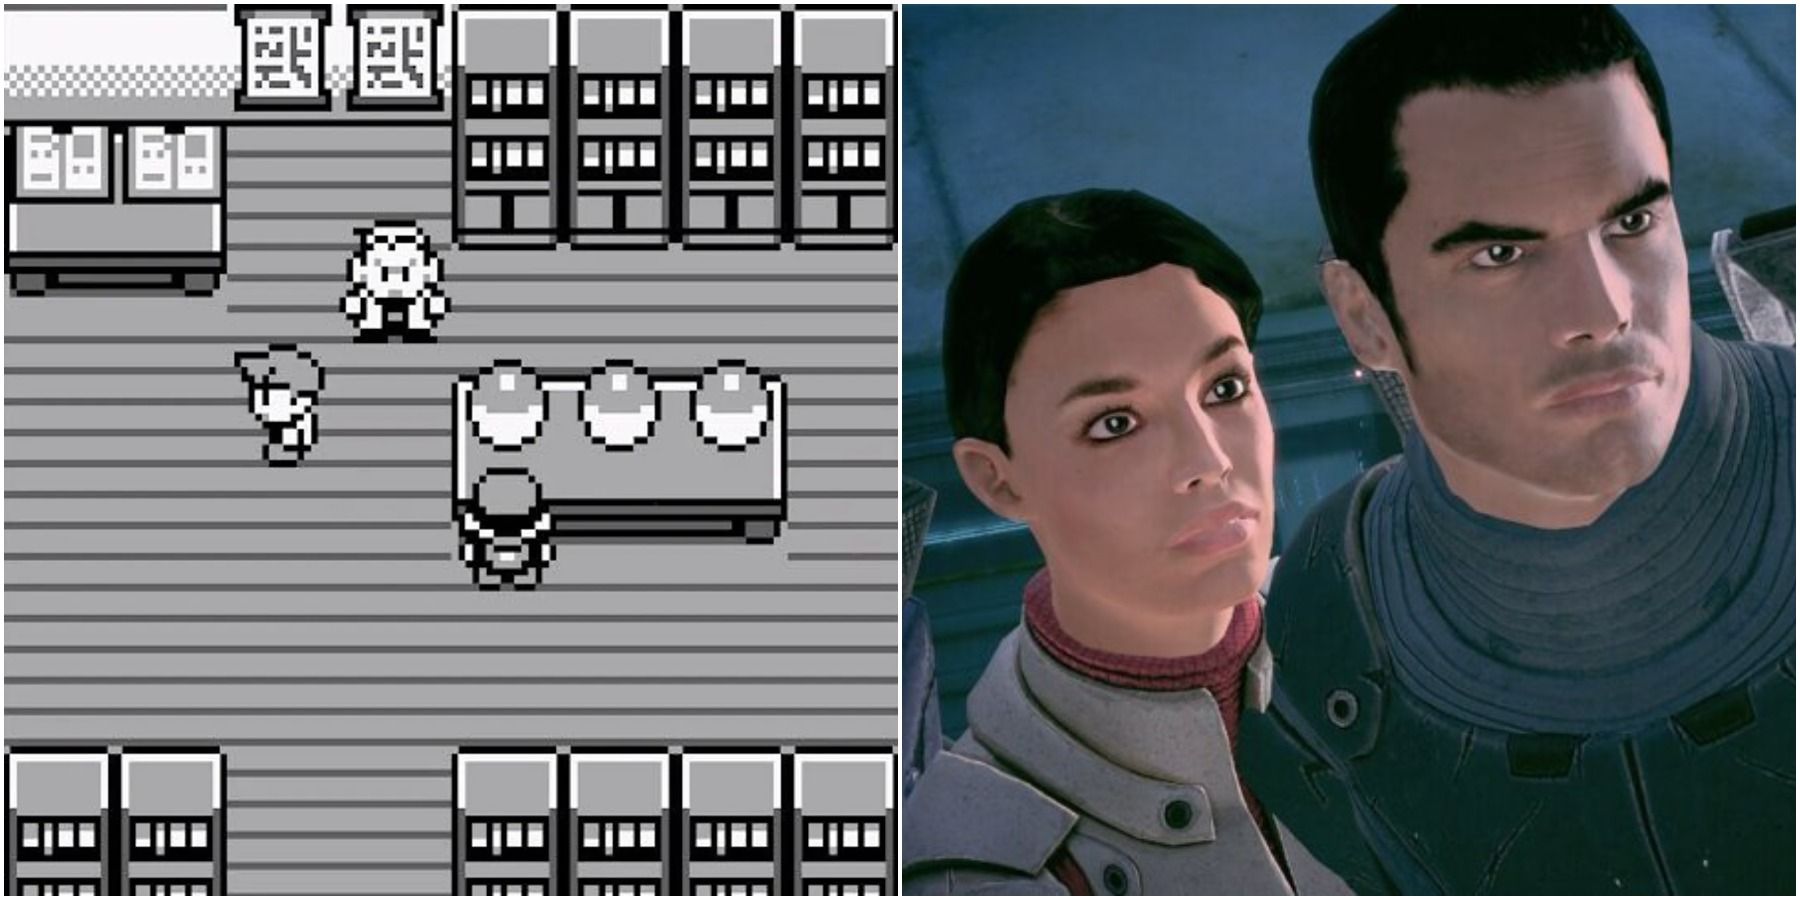 (Left) Choosing a Pokemon (Right) Ashley and Kaidan from Mass Effect